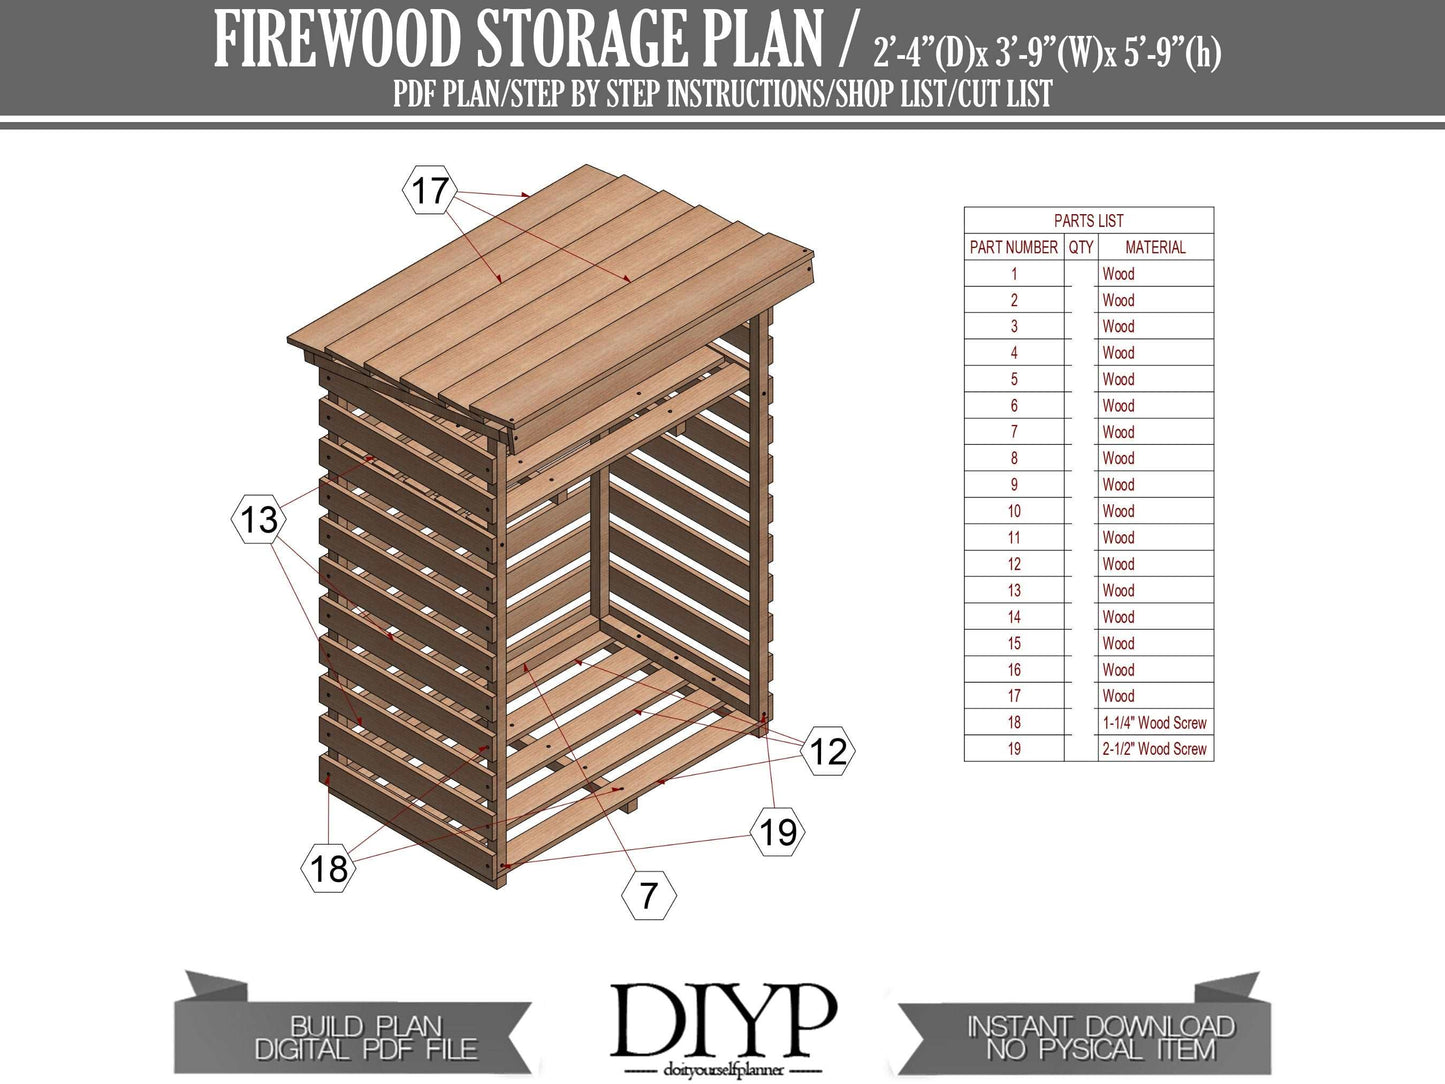 Useful Firewood Storage Shed Plans- DIY plans for wooden shelter with storage space